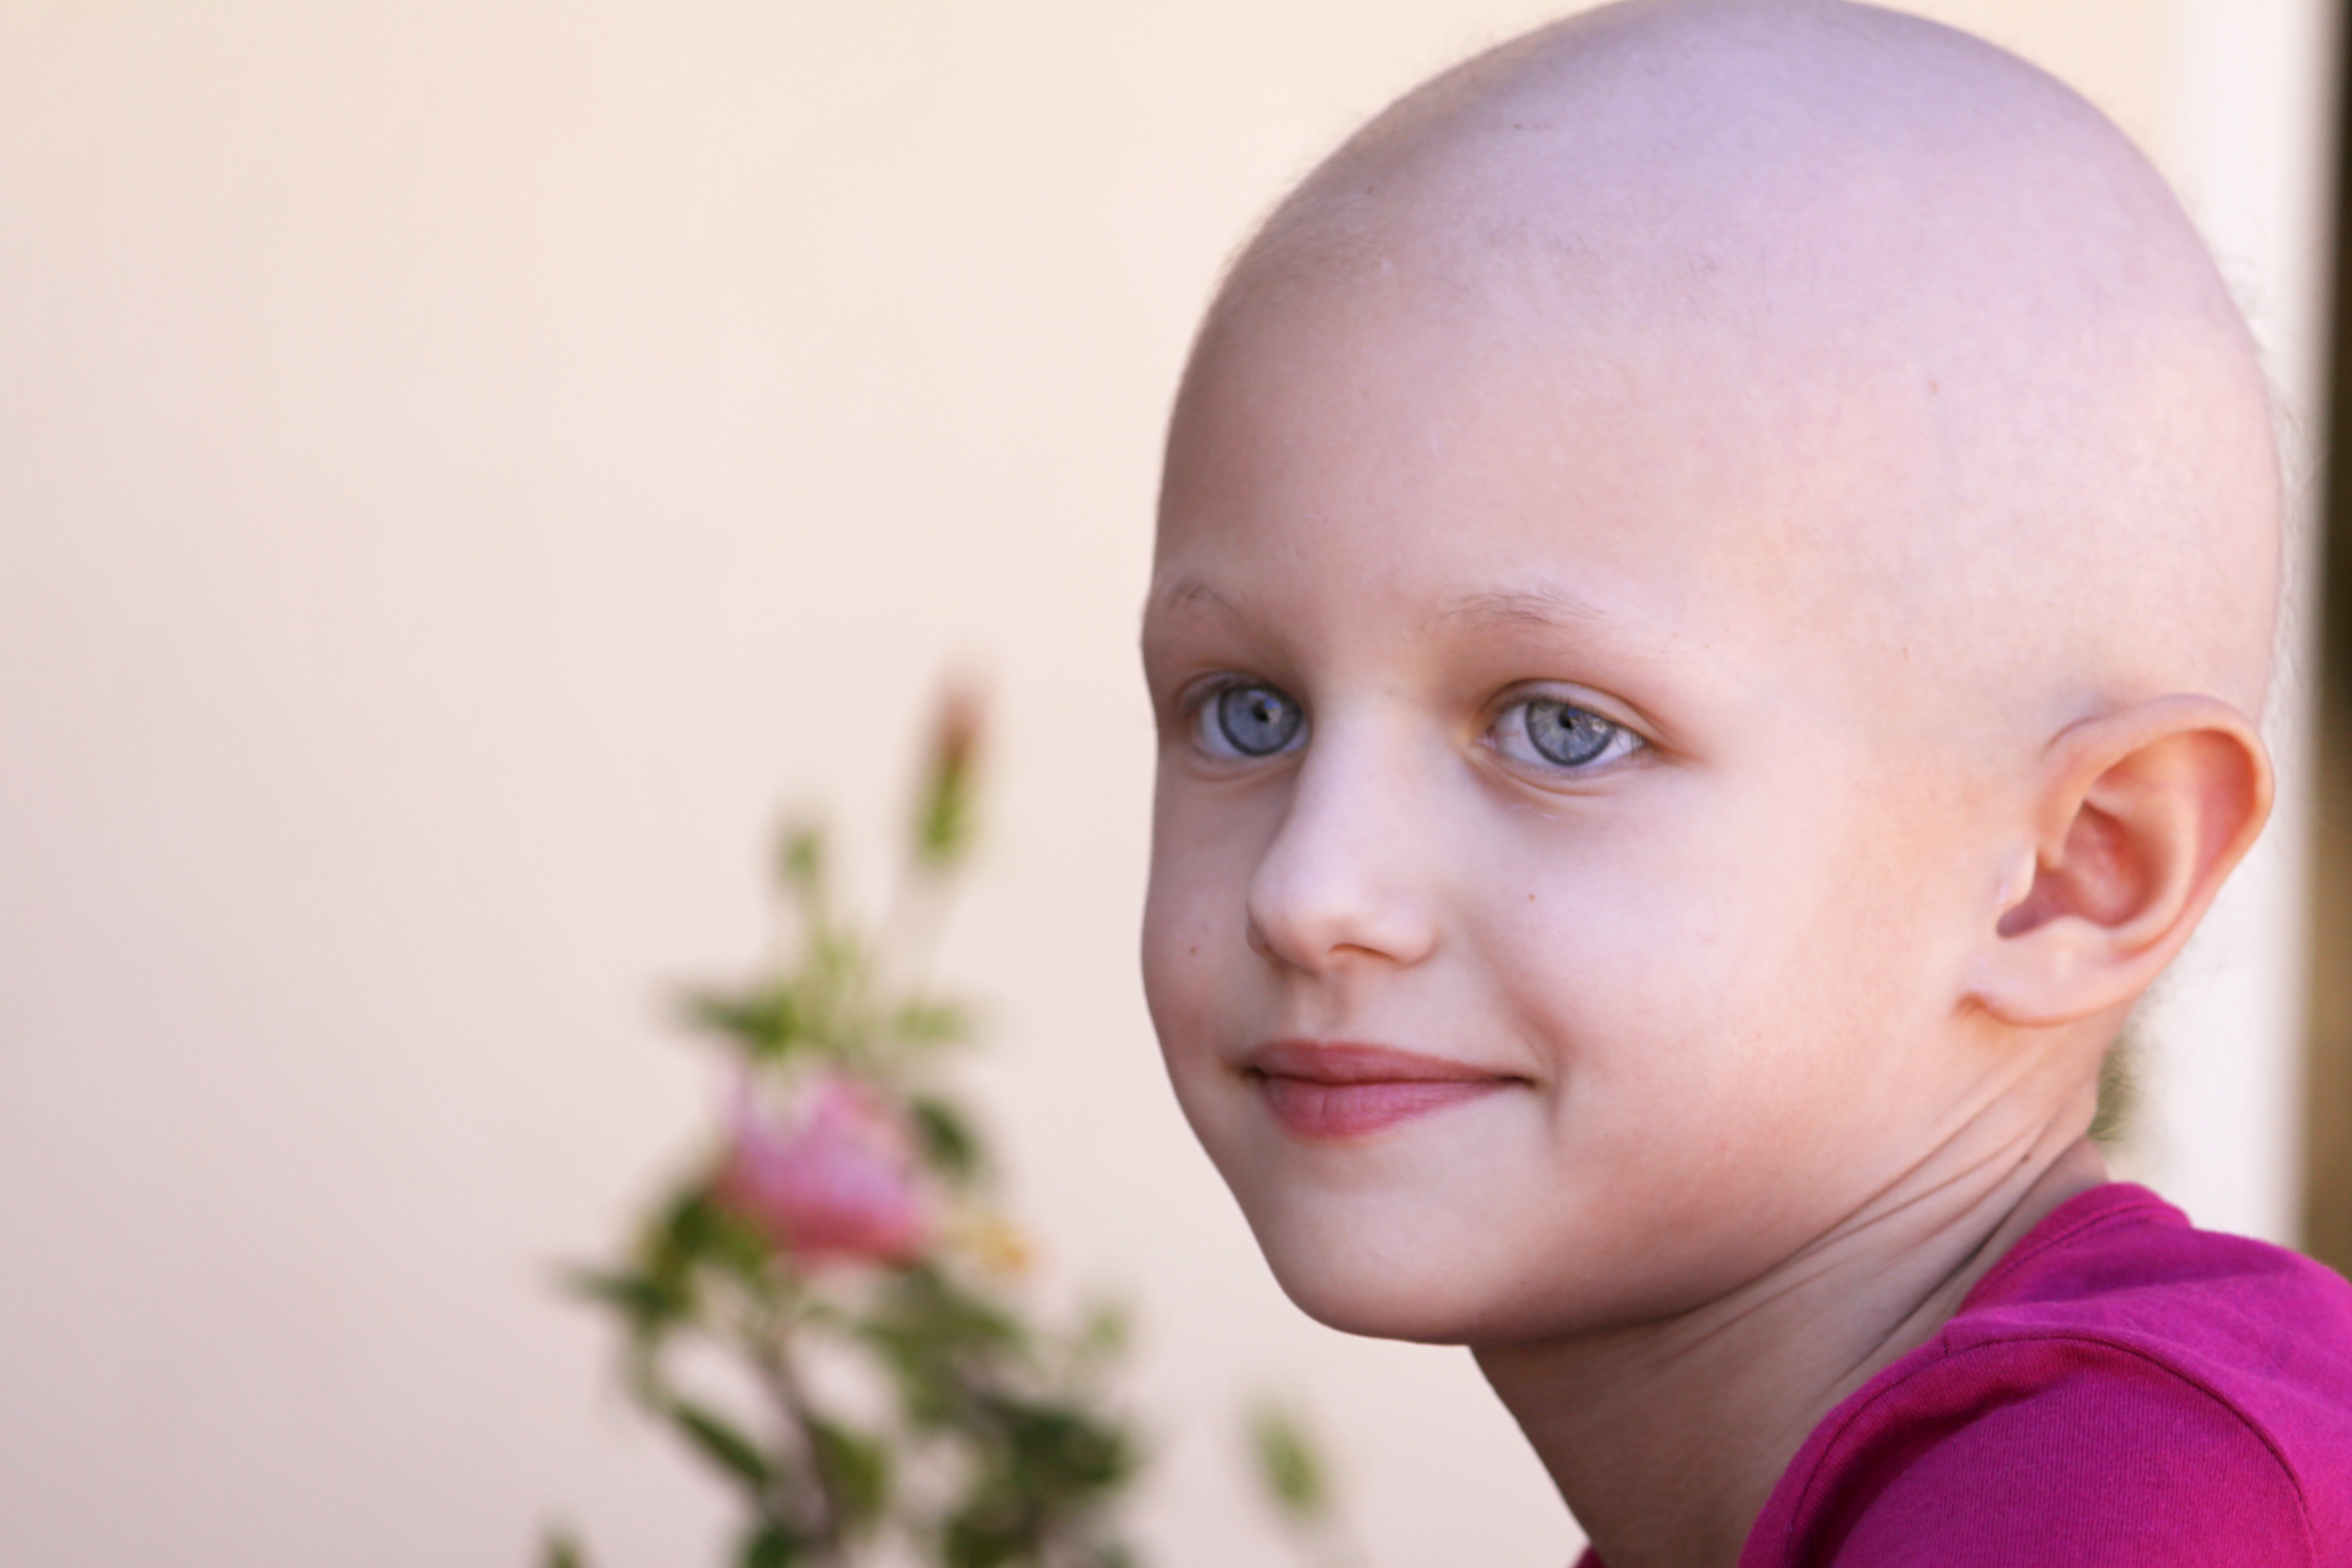 A close-up photo of a young girl without hair. Leukemia is a cancer involving the body’s white blood cells and bone marrow. It is most common in adults over 60, but kids can also get it.